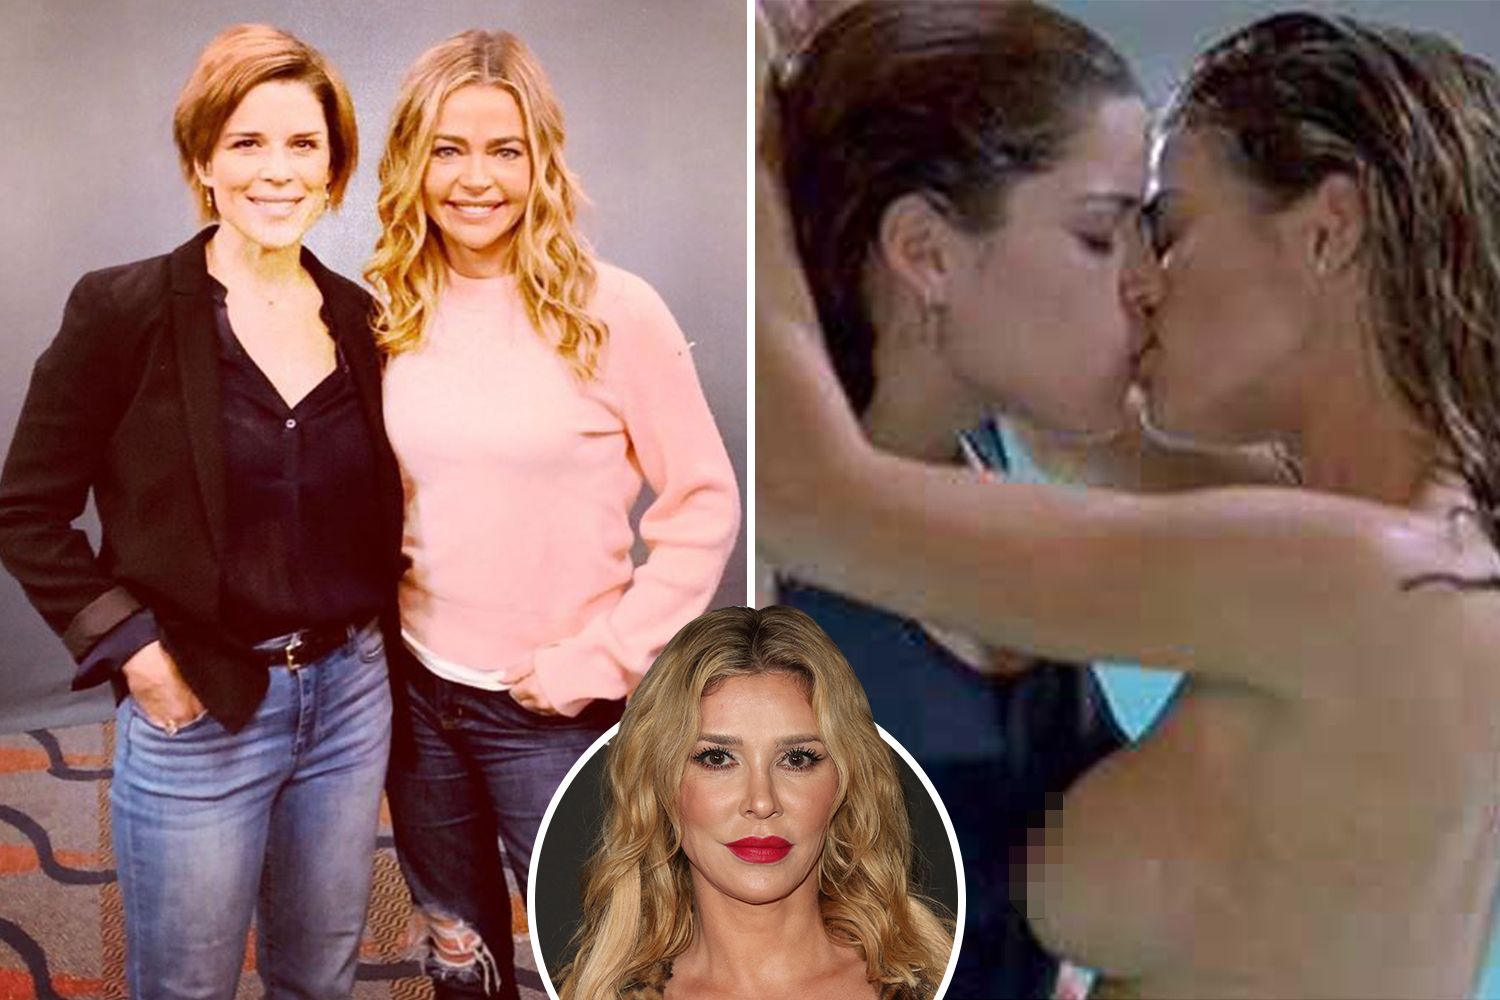 diana dior recommends denise richards lesbian sex pic